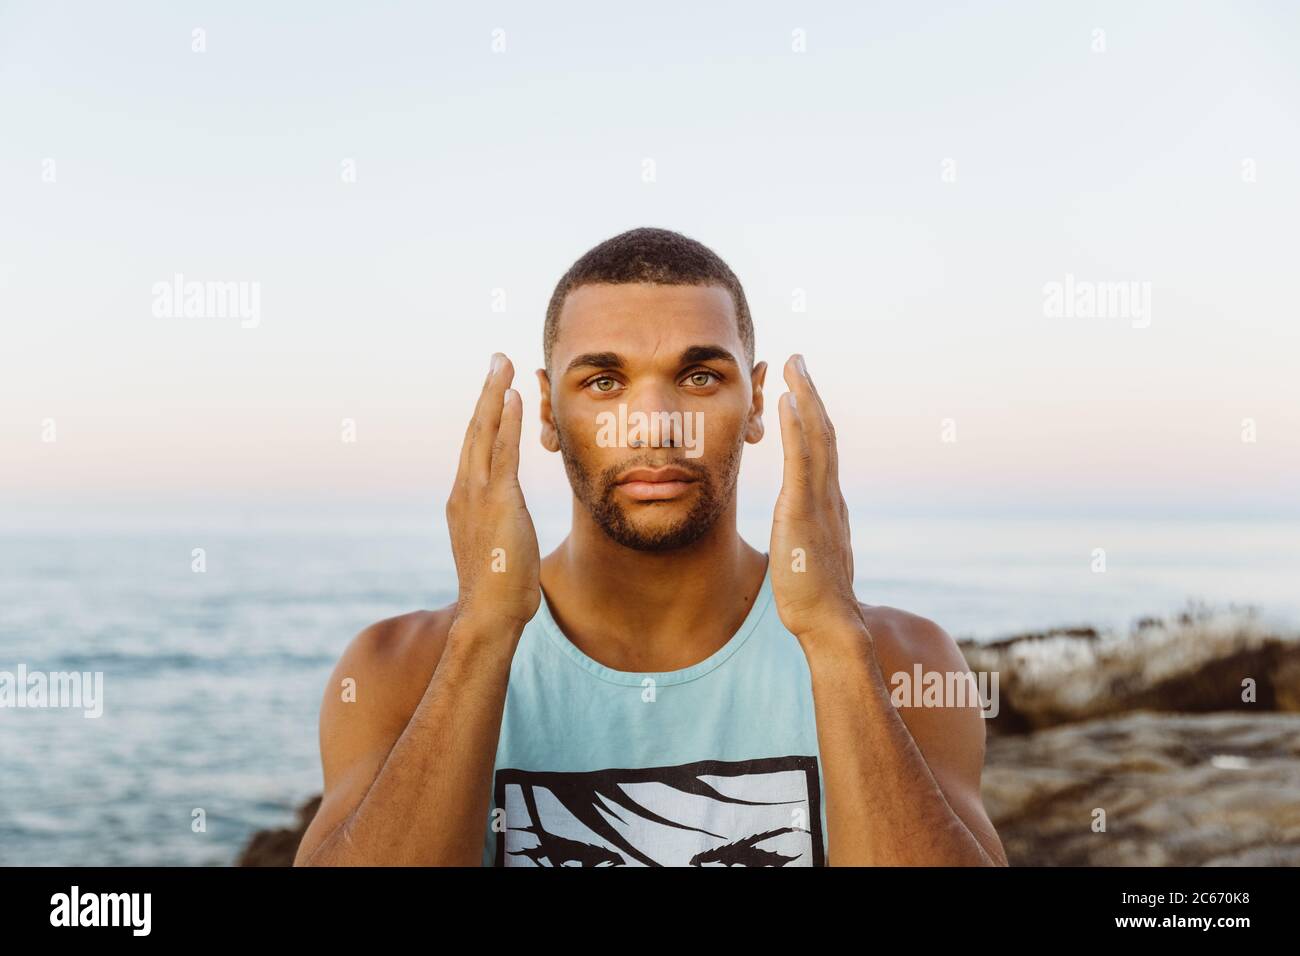 engaging portrait of male athlete with hands next to his cheeks Stock Photo